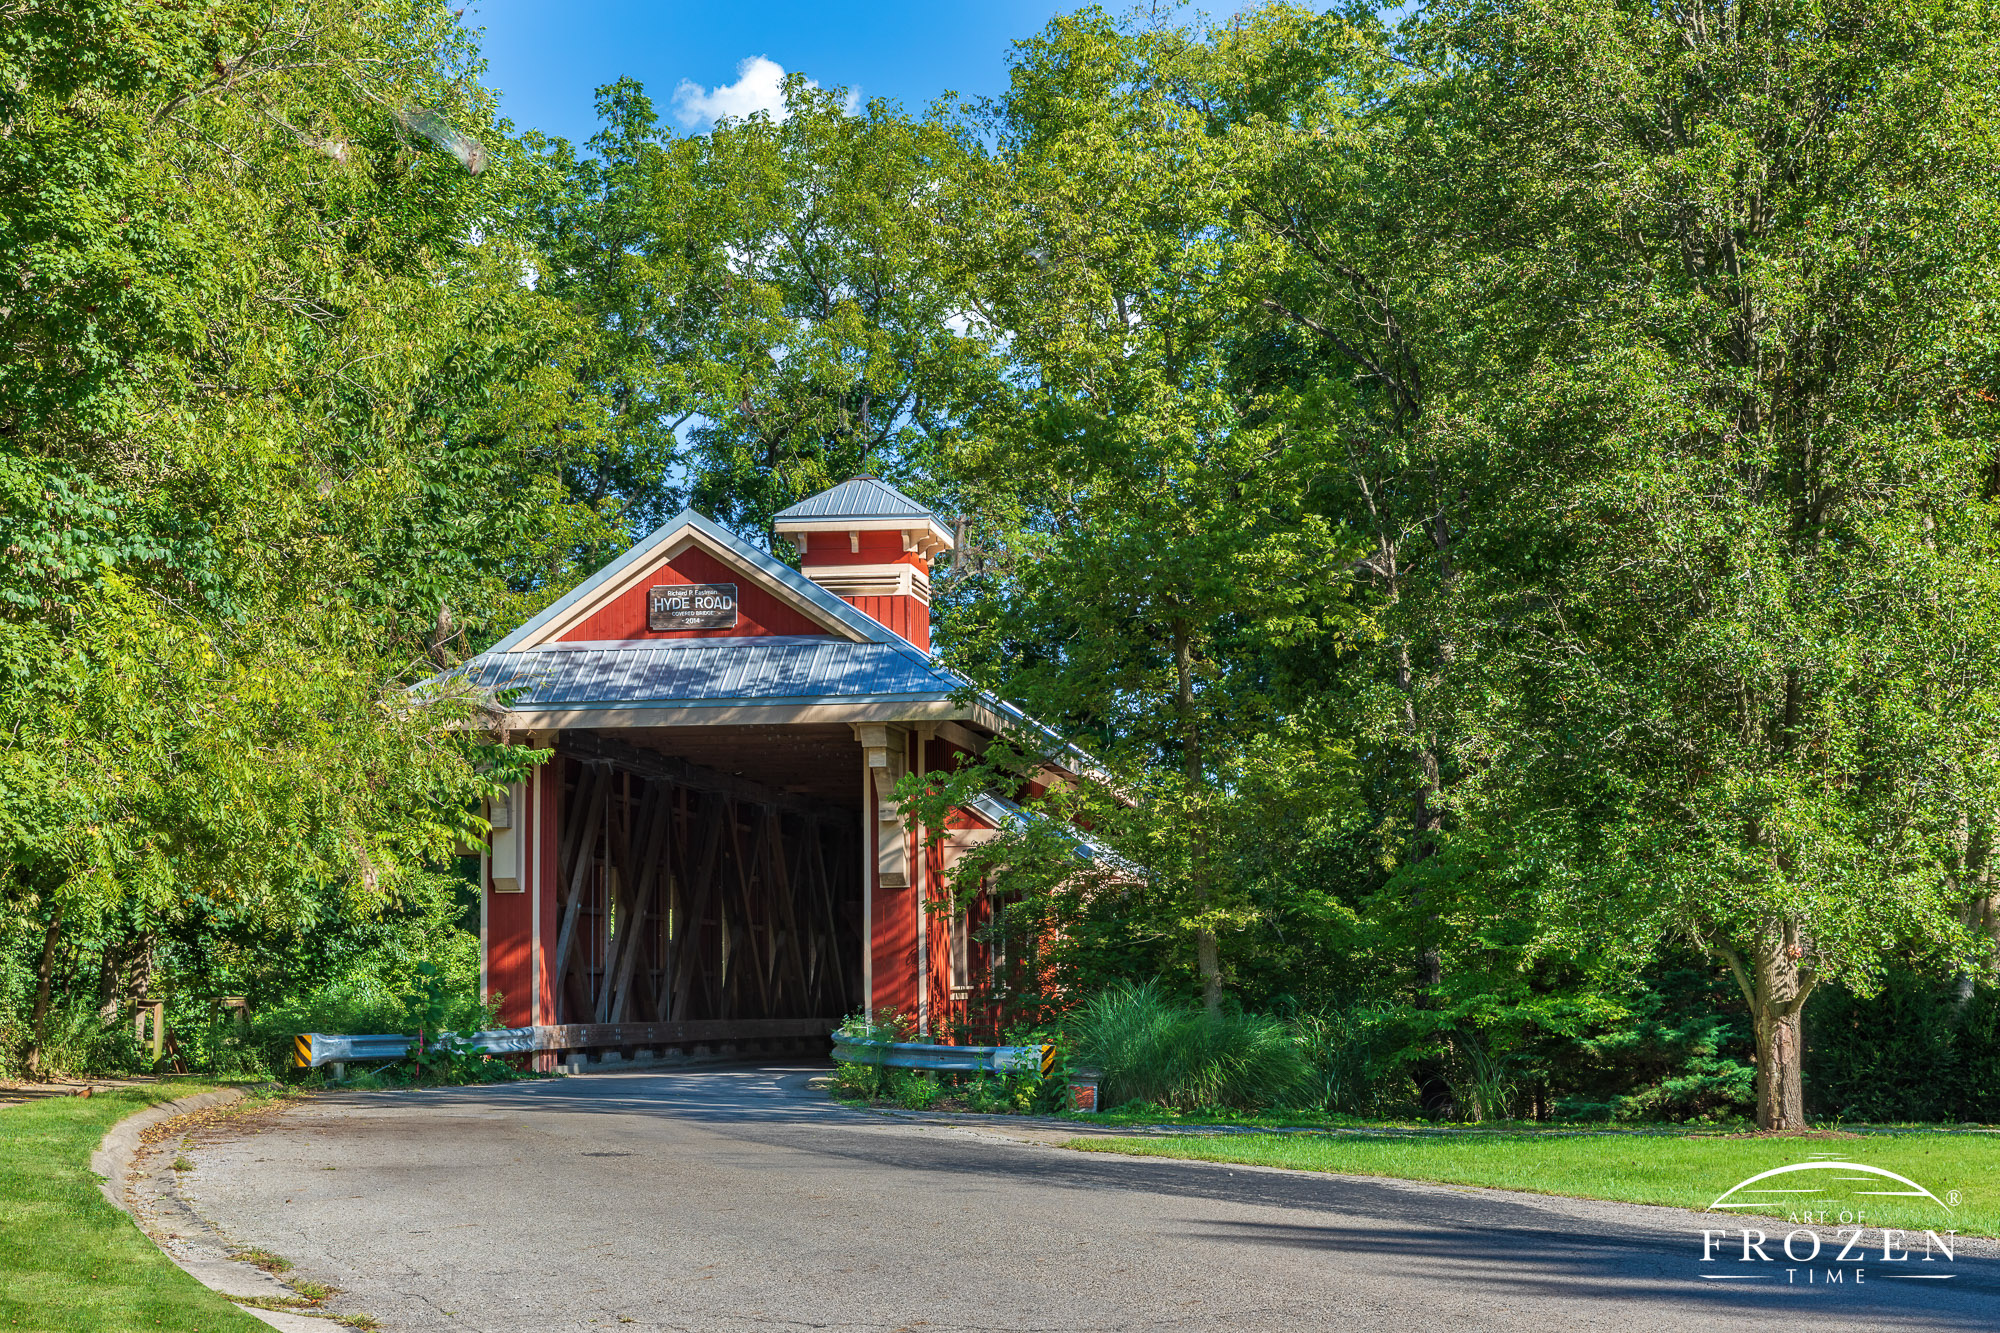 A bridge red covered bridge is surrounded by lush green trees under blue skies